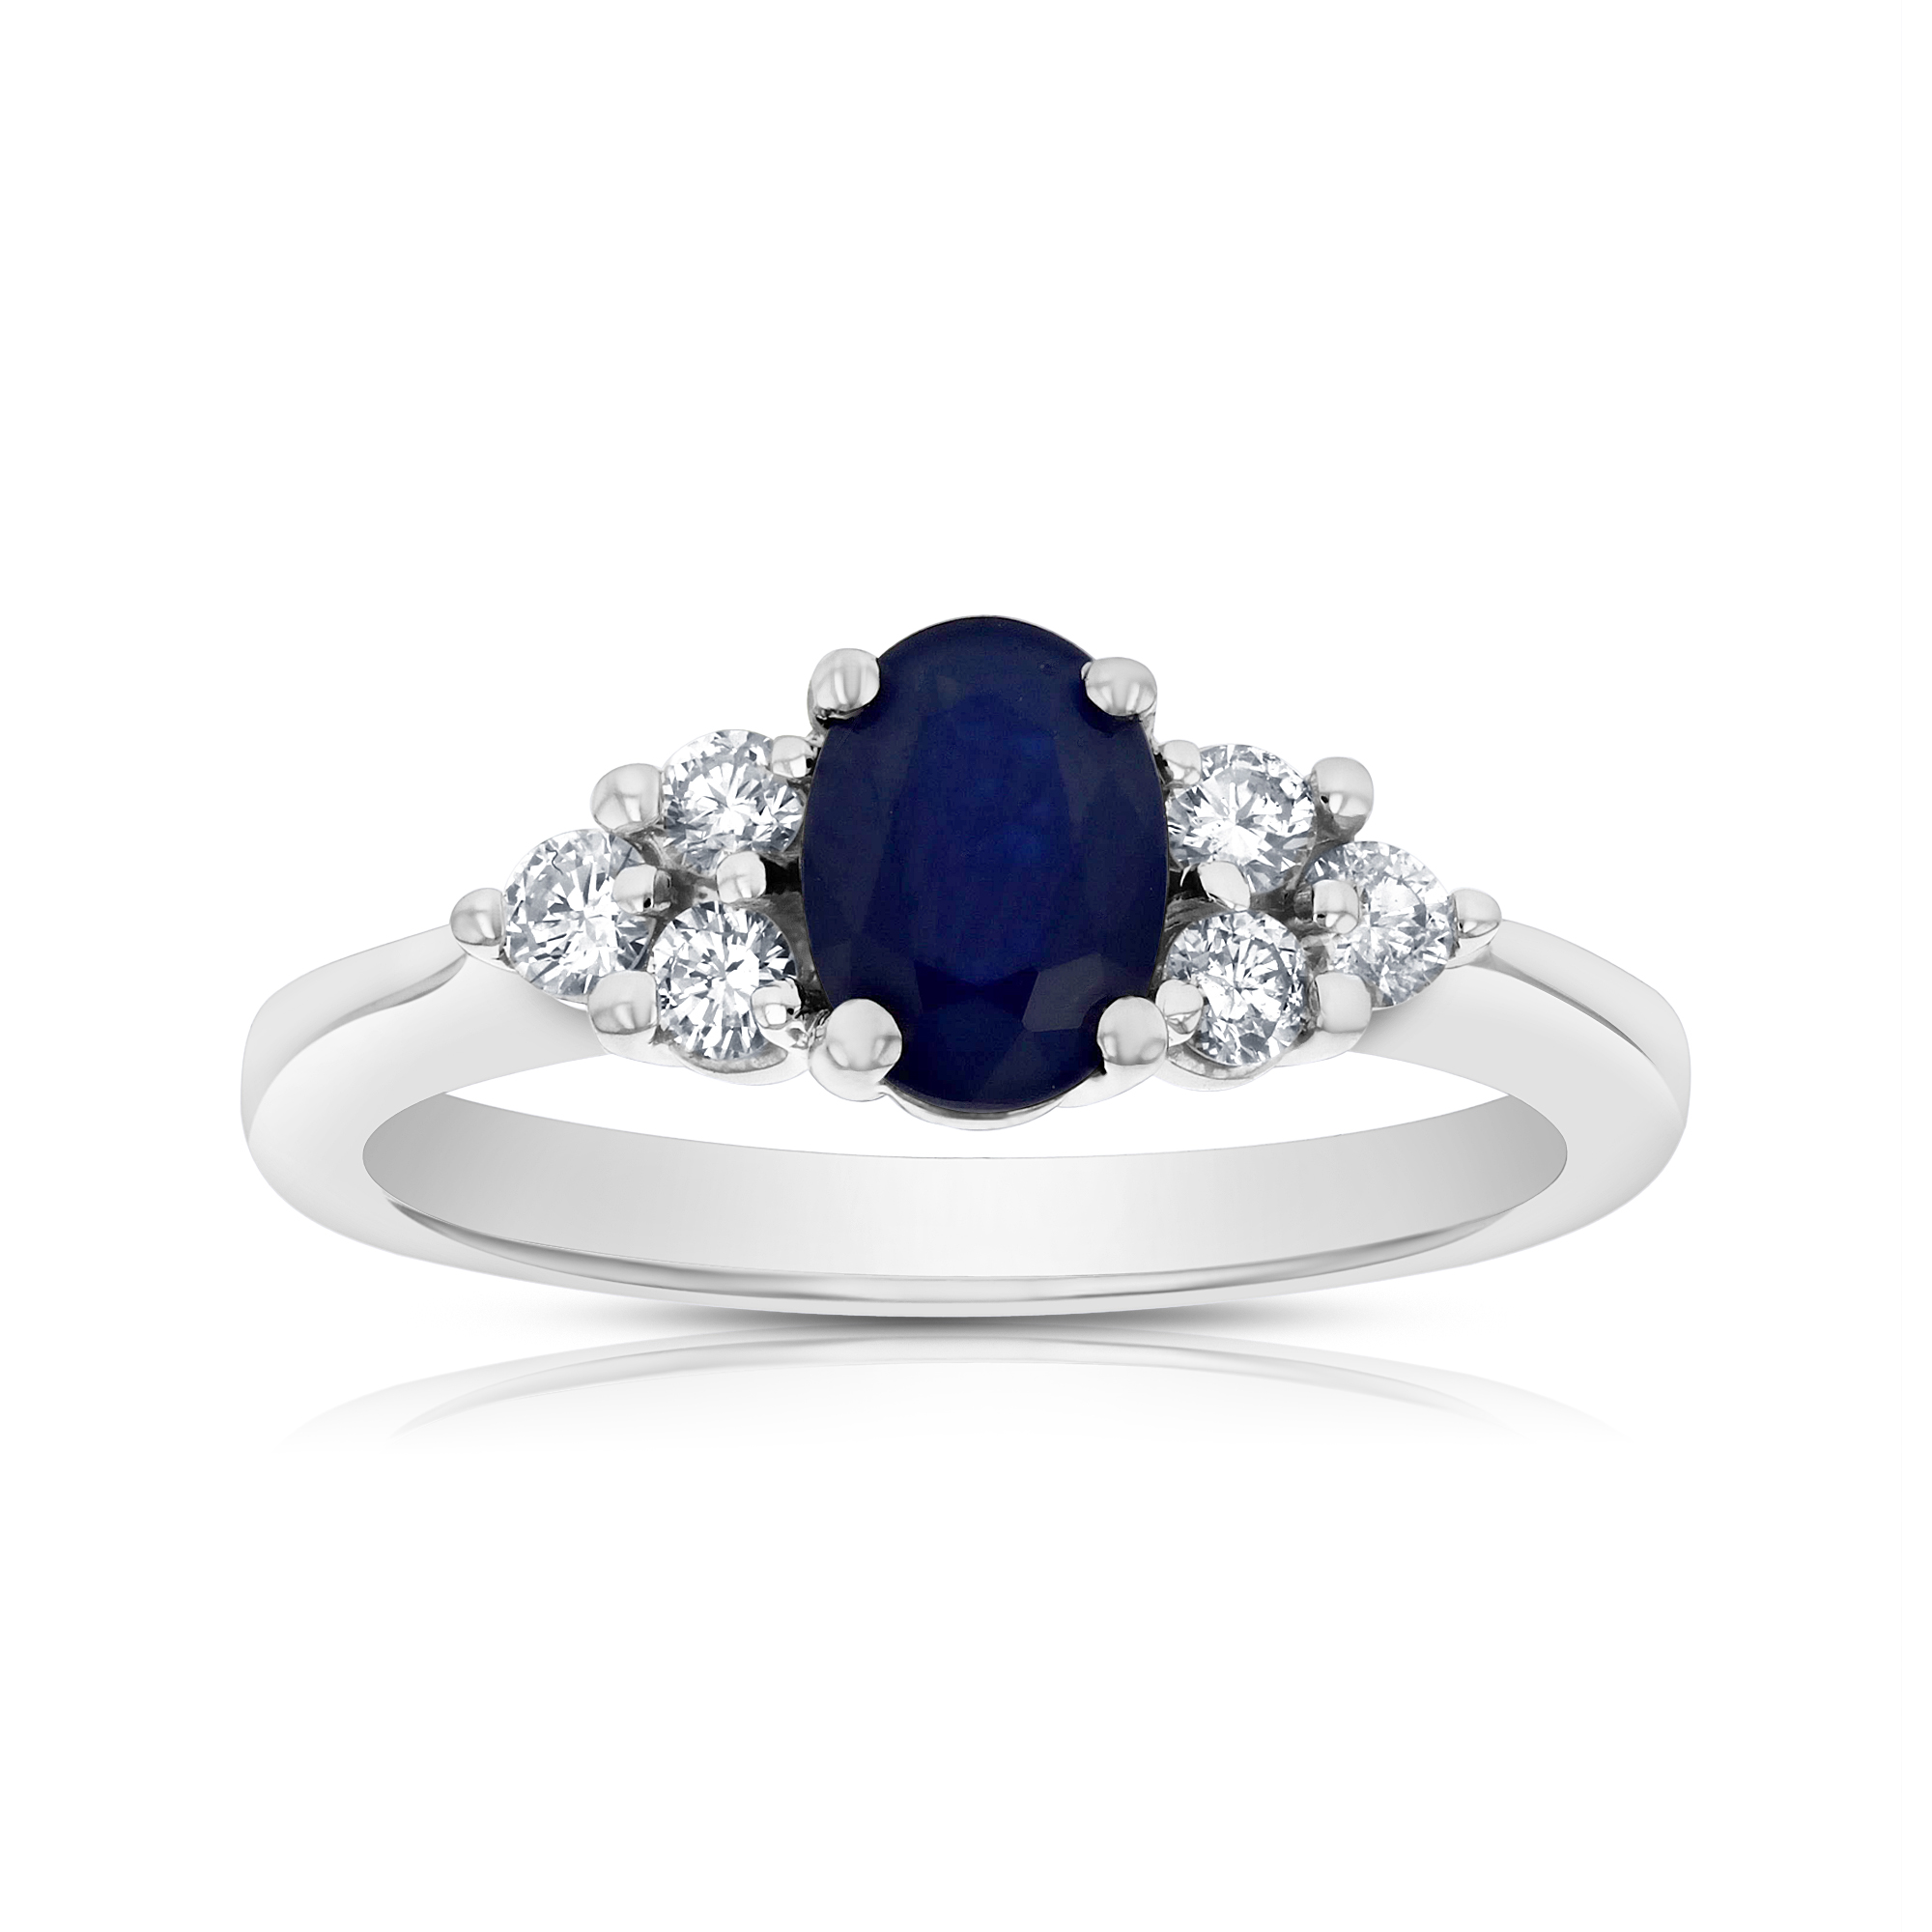 View 0.30ctw Diamond and Sapphire Ring in 14k Gold